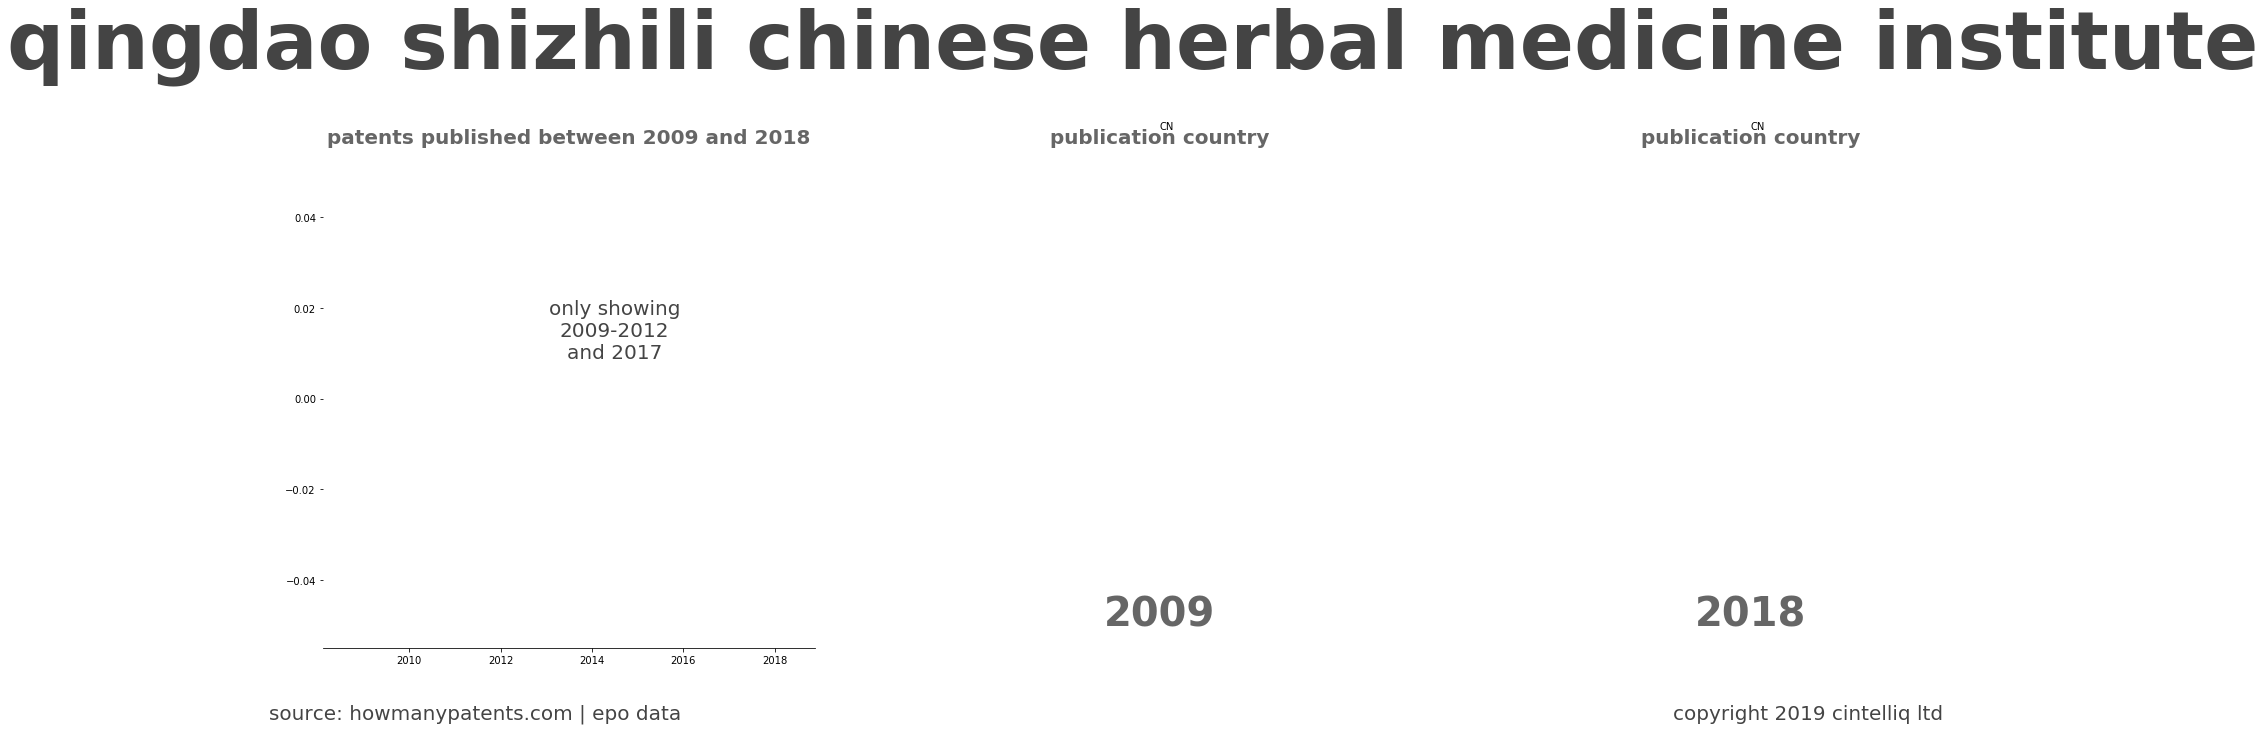 summary of patents for Qingdao Shizhili Chinese Herbal Medicine Institute